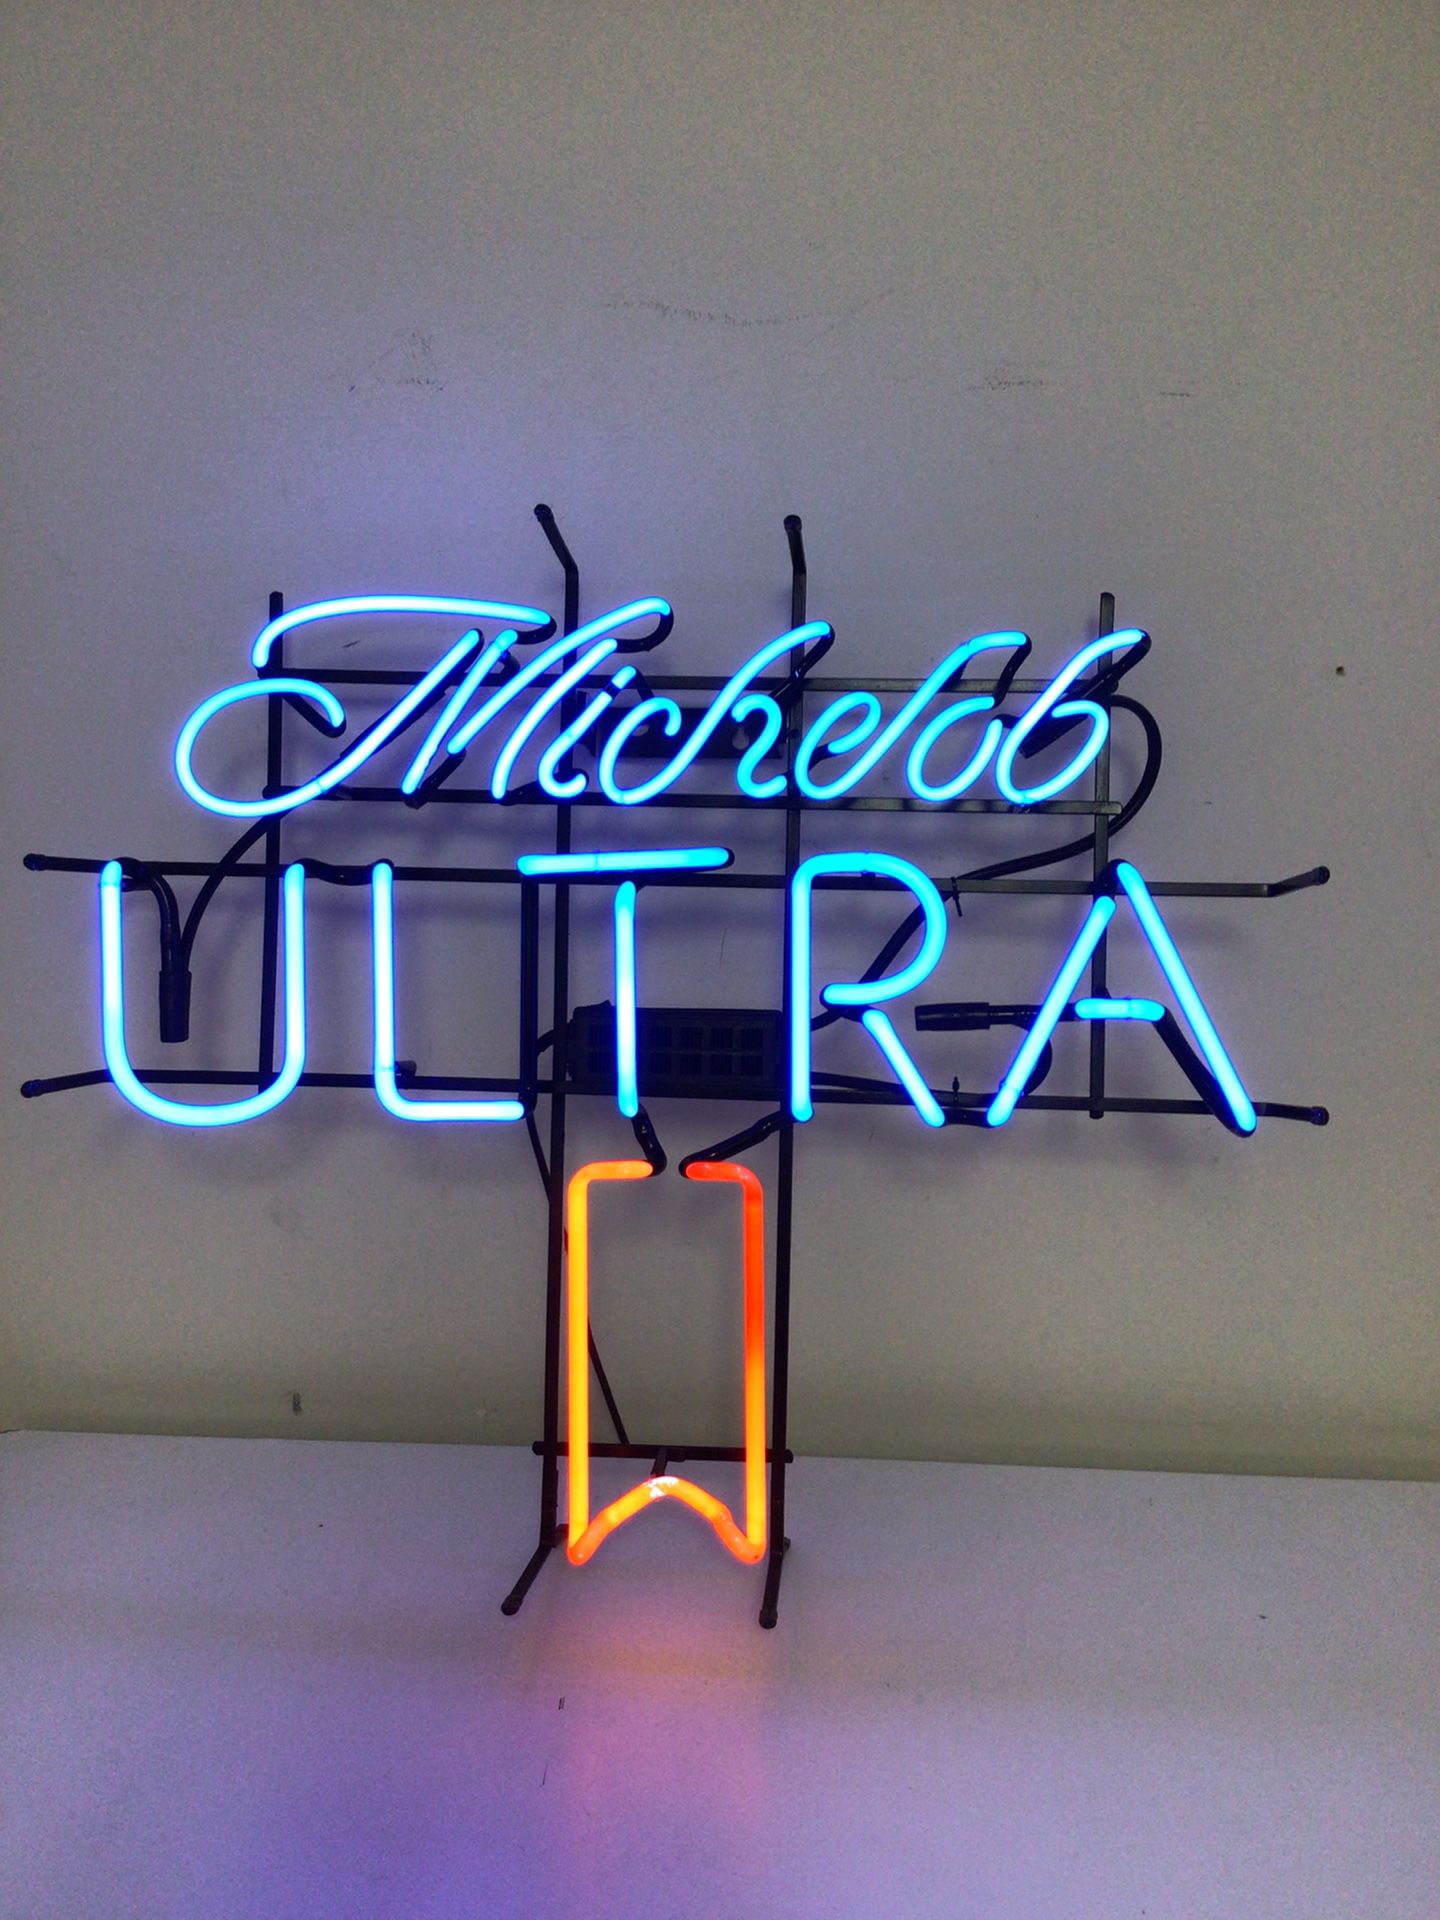 Michelob Ultra beer neon sign 